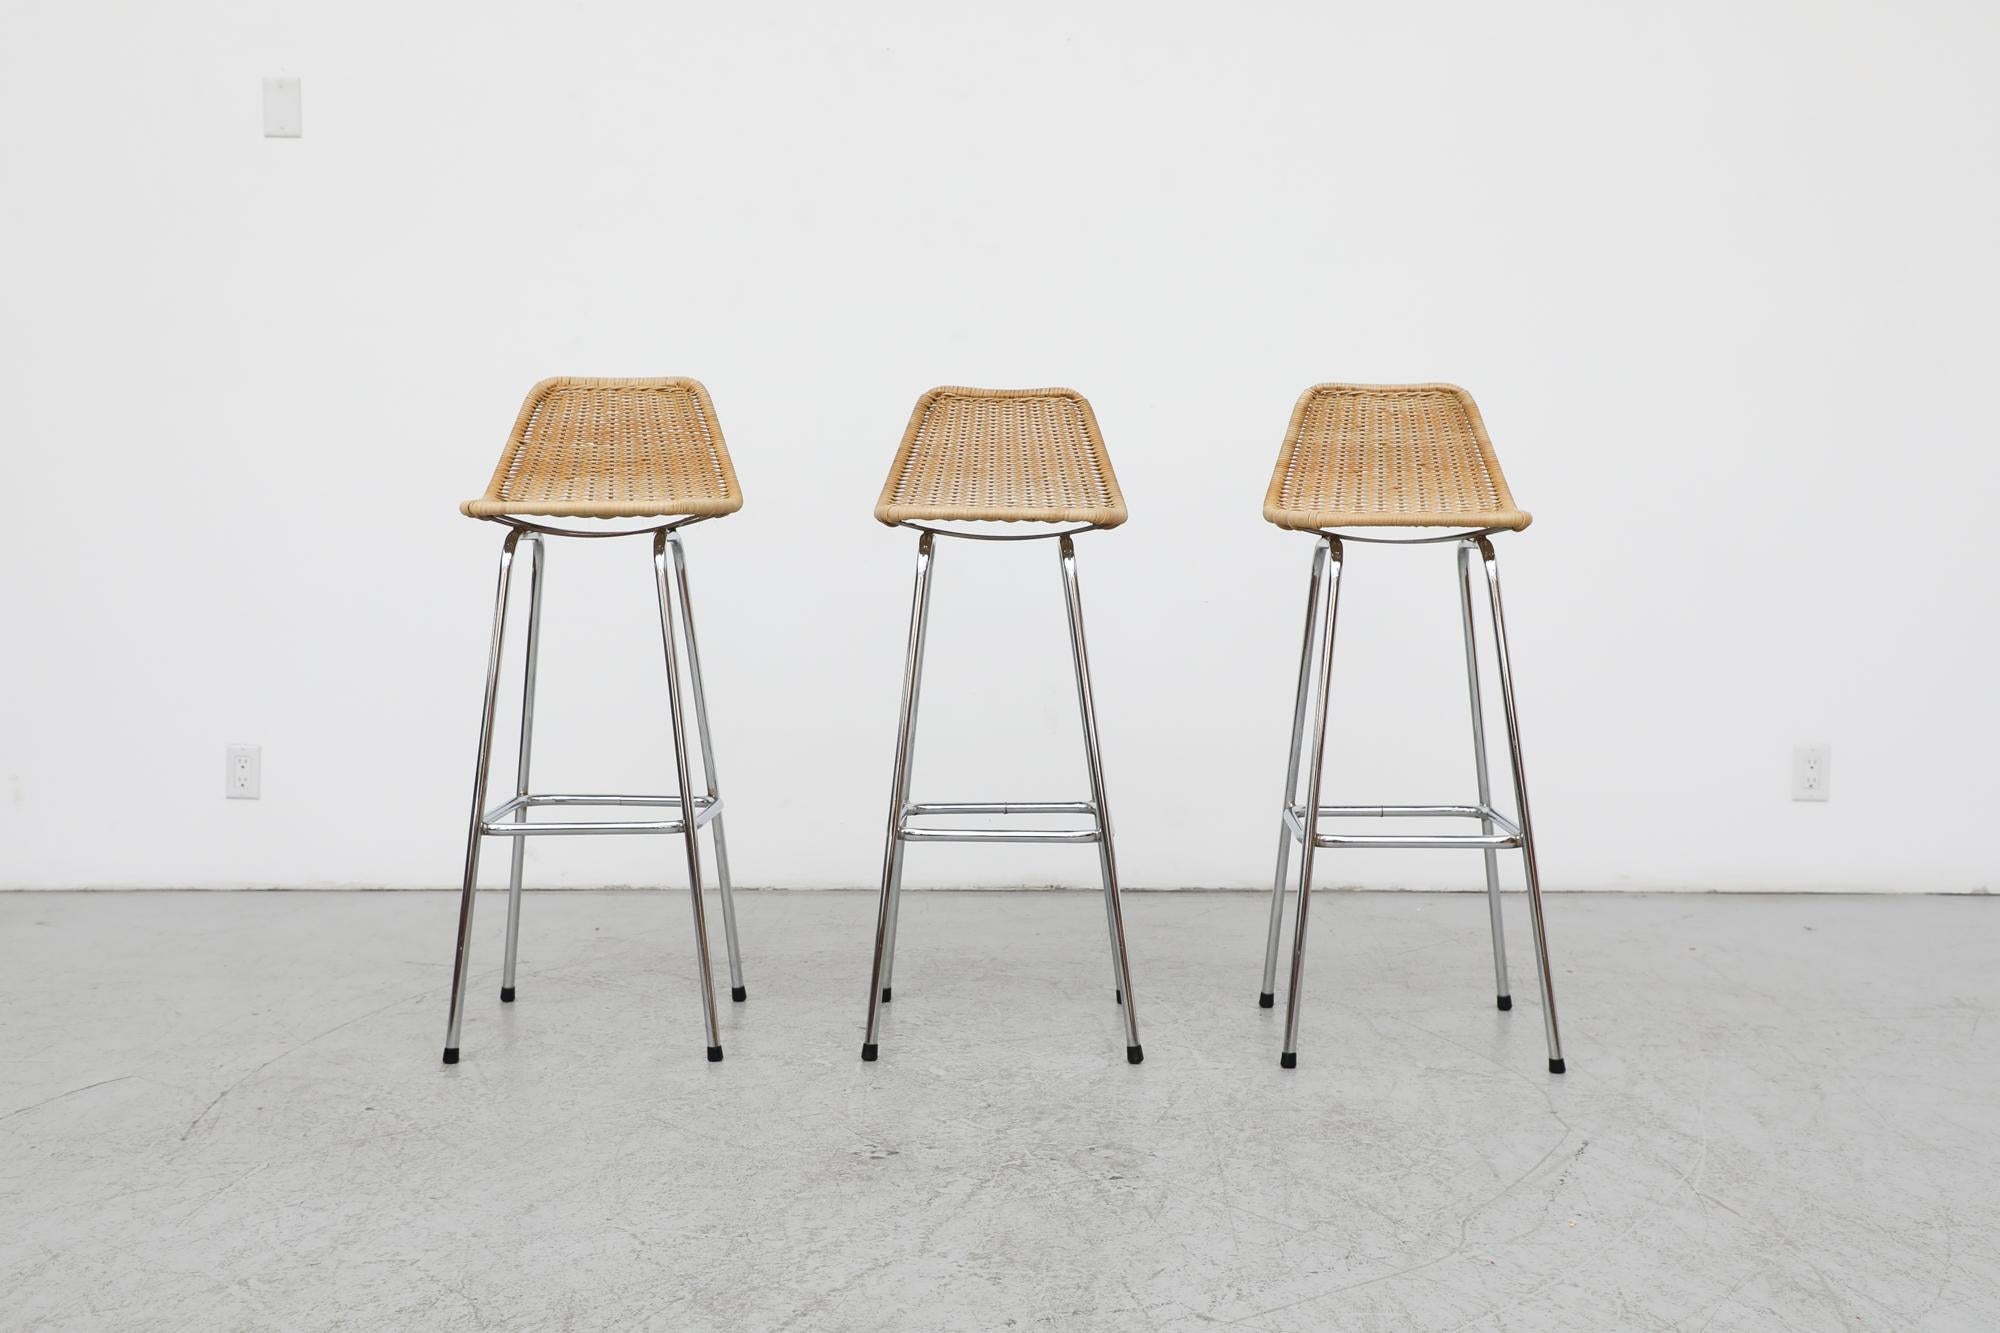 Mid-Century, Charlotte Perriand style wicker bar stools as designed by Dutch post war designer Dirk van Sliedregt for Rohe Noordwolde, a furniture maker that was widely renowned for their use of wicker, rattan bamboo in contemporary furniture. These